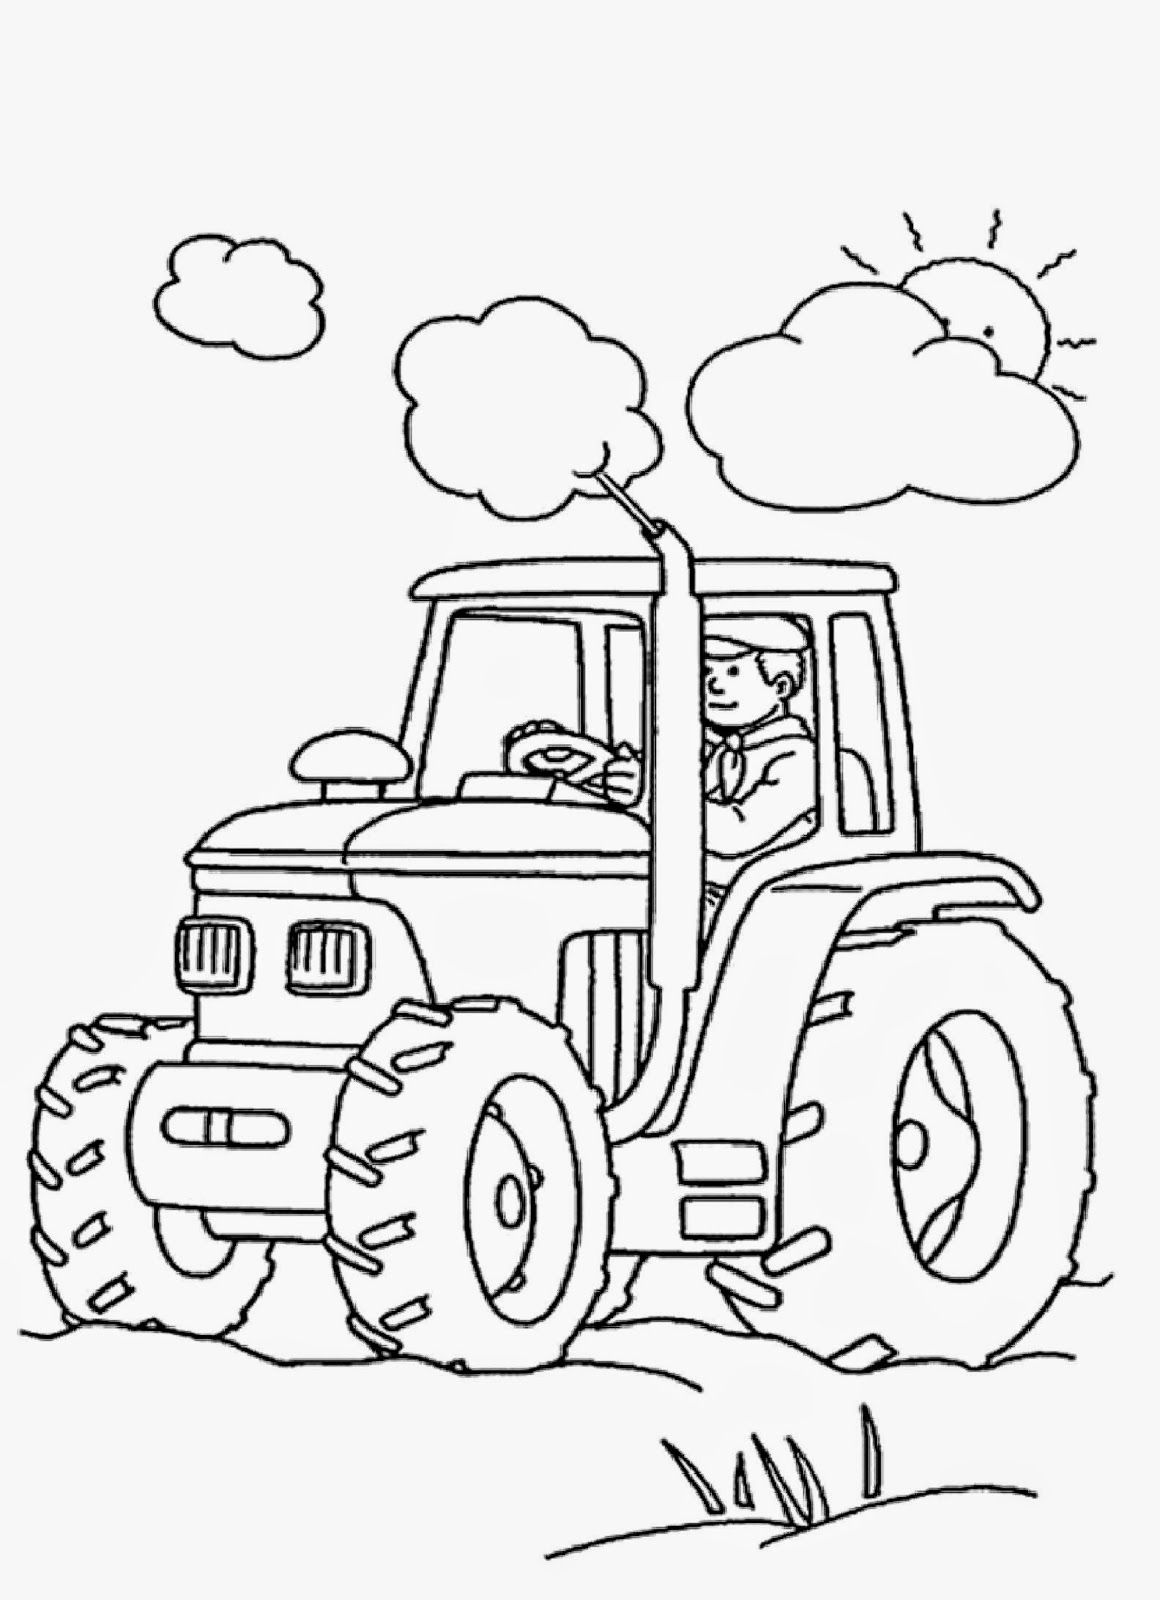 Coloring Pages: Printable Coloring Book Pages For Kids Free ...